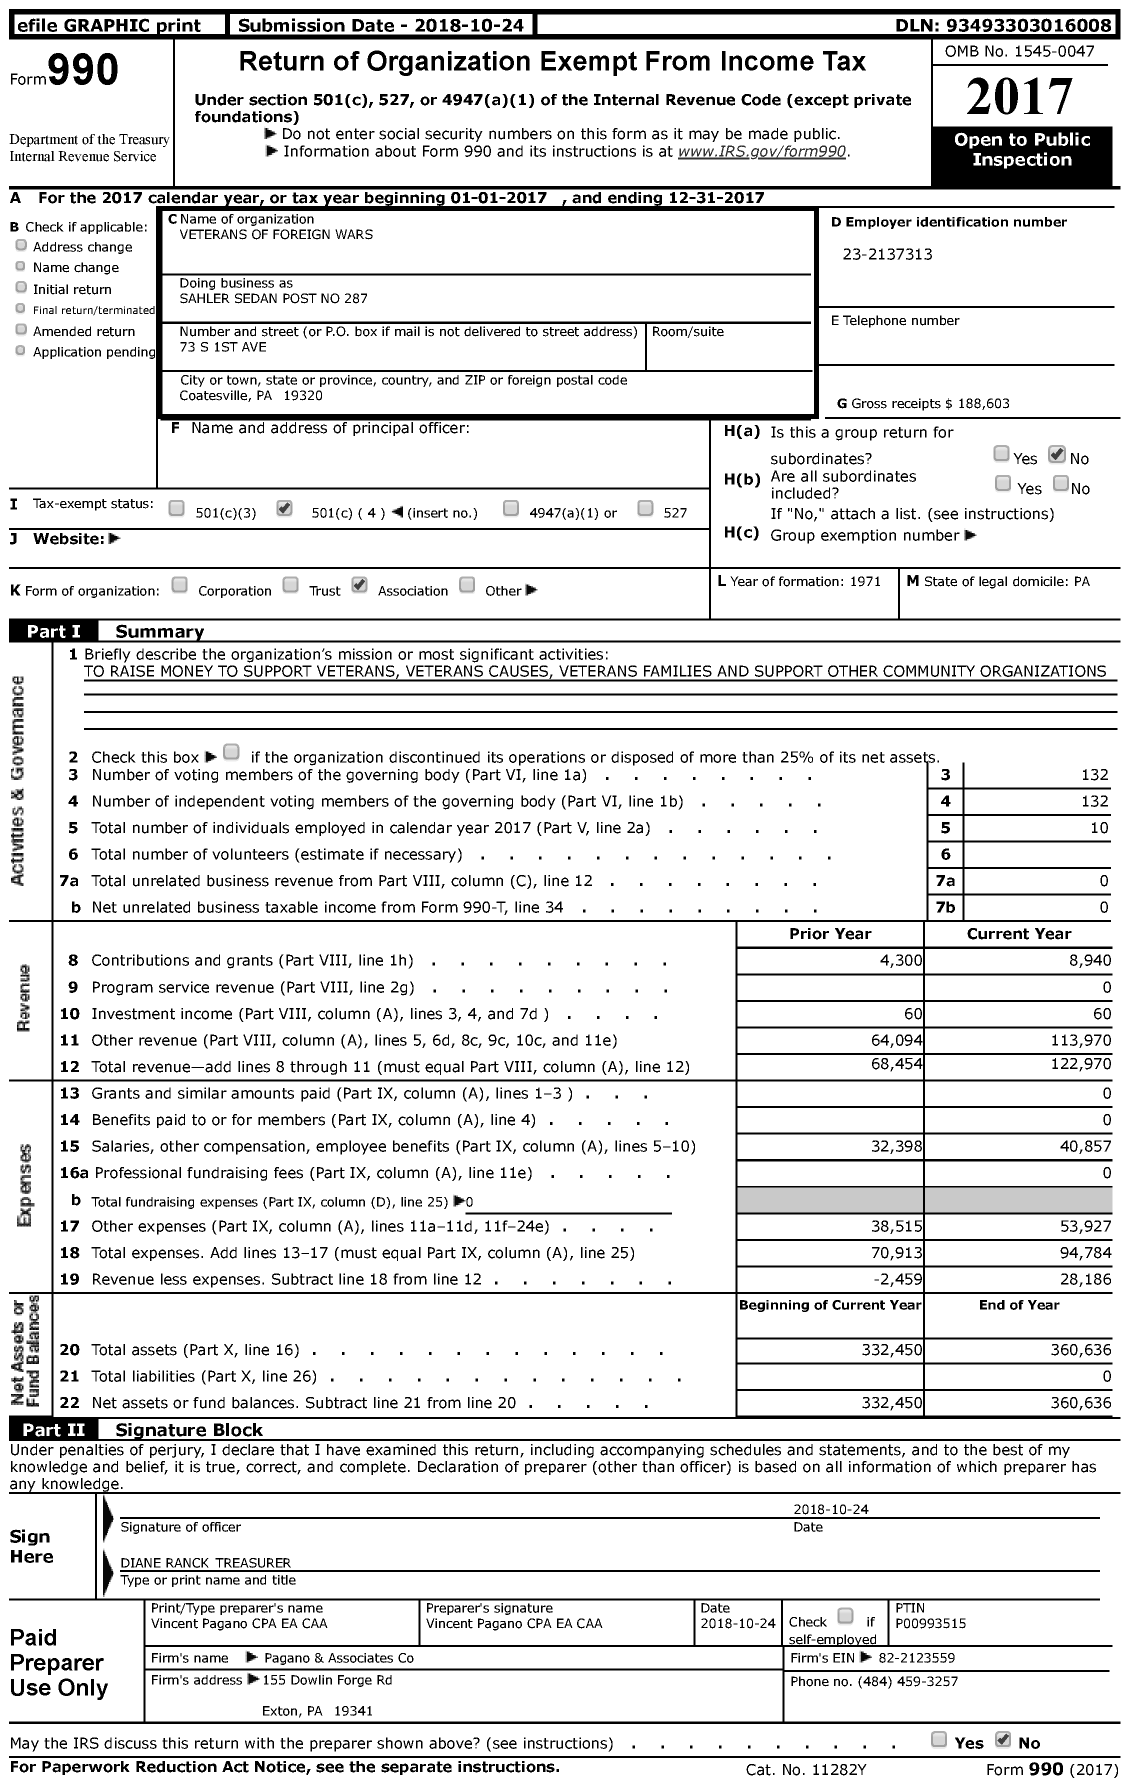 Image of first page of 2017 Form 990 for VFW Department of Pennsylvania - Sahler Sedan Post No 287